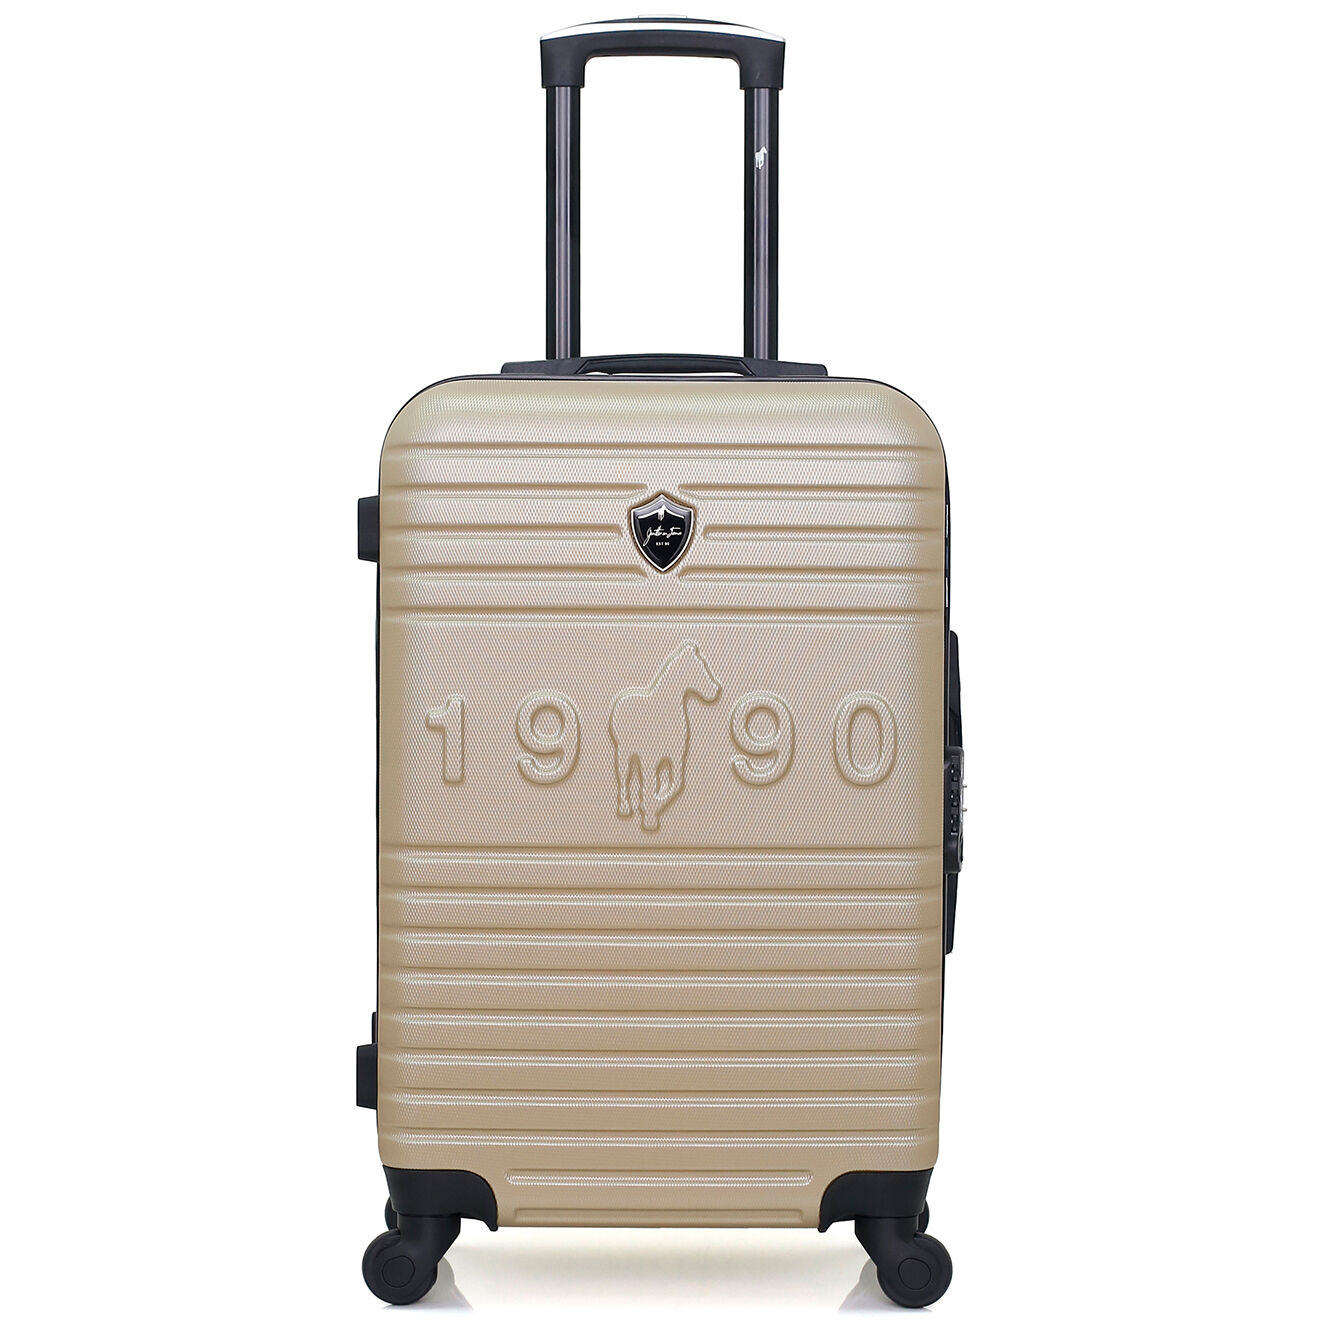 Valise Cabine 4 roues Fred 55 cm beige